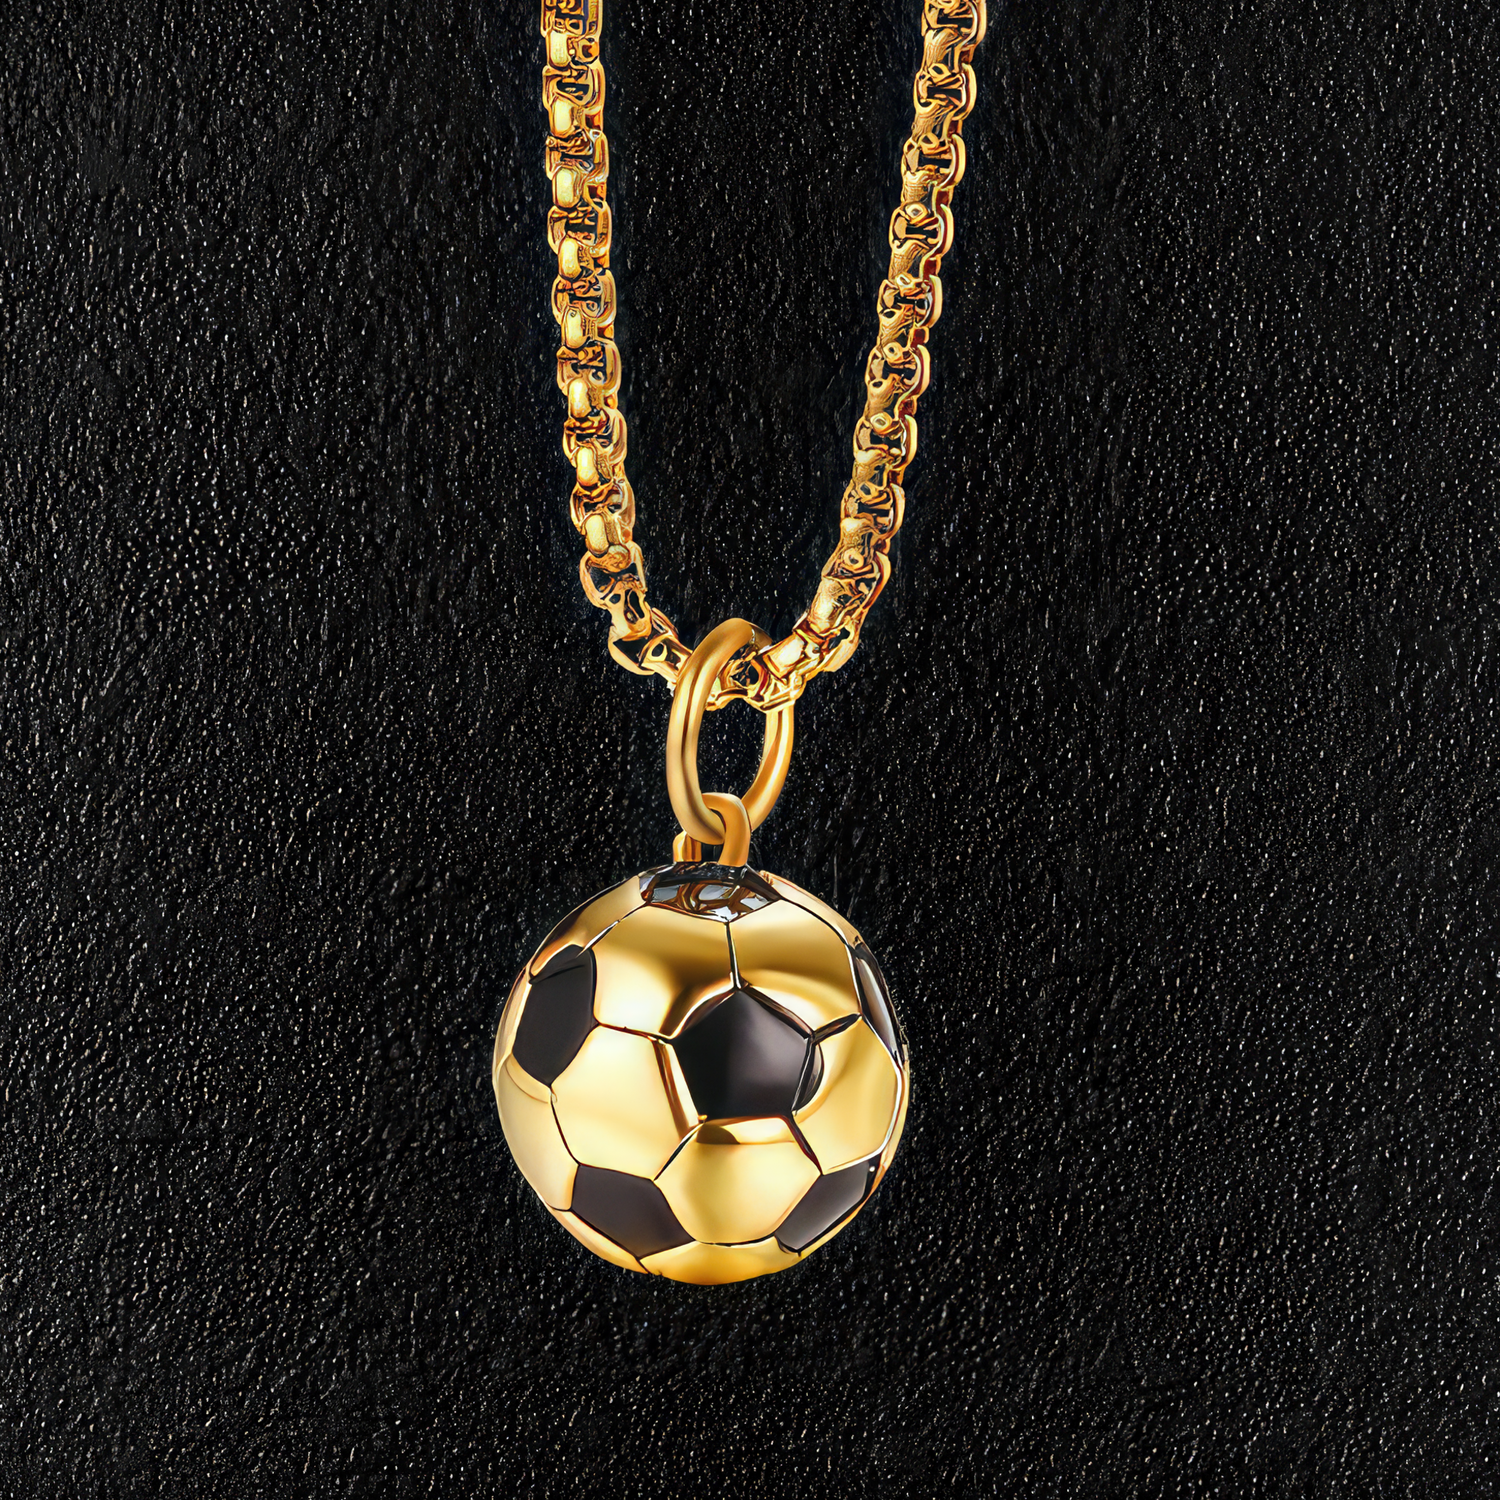 ALLYES Punk Stainless Steel Football Necklace for Men Women Trendy Sport  Long Chain Soccer Charm Pendant Necklaces Jewelry Gifts